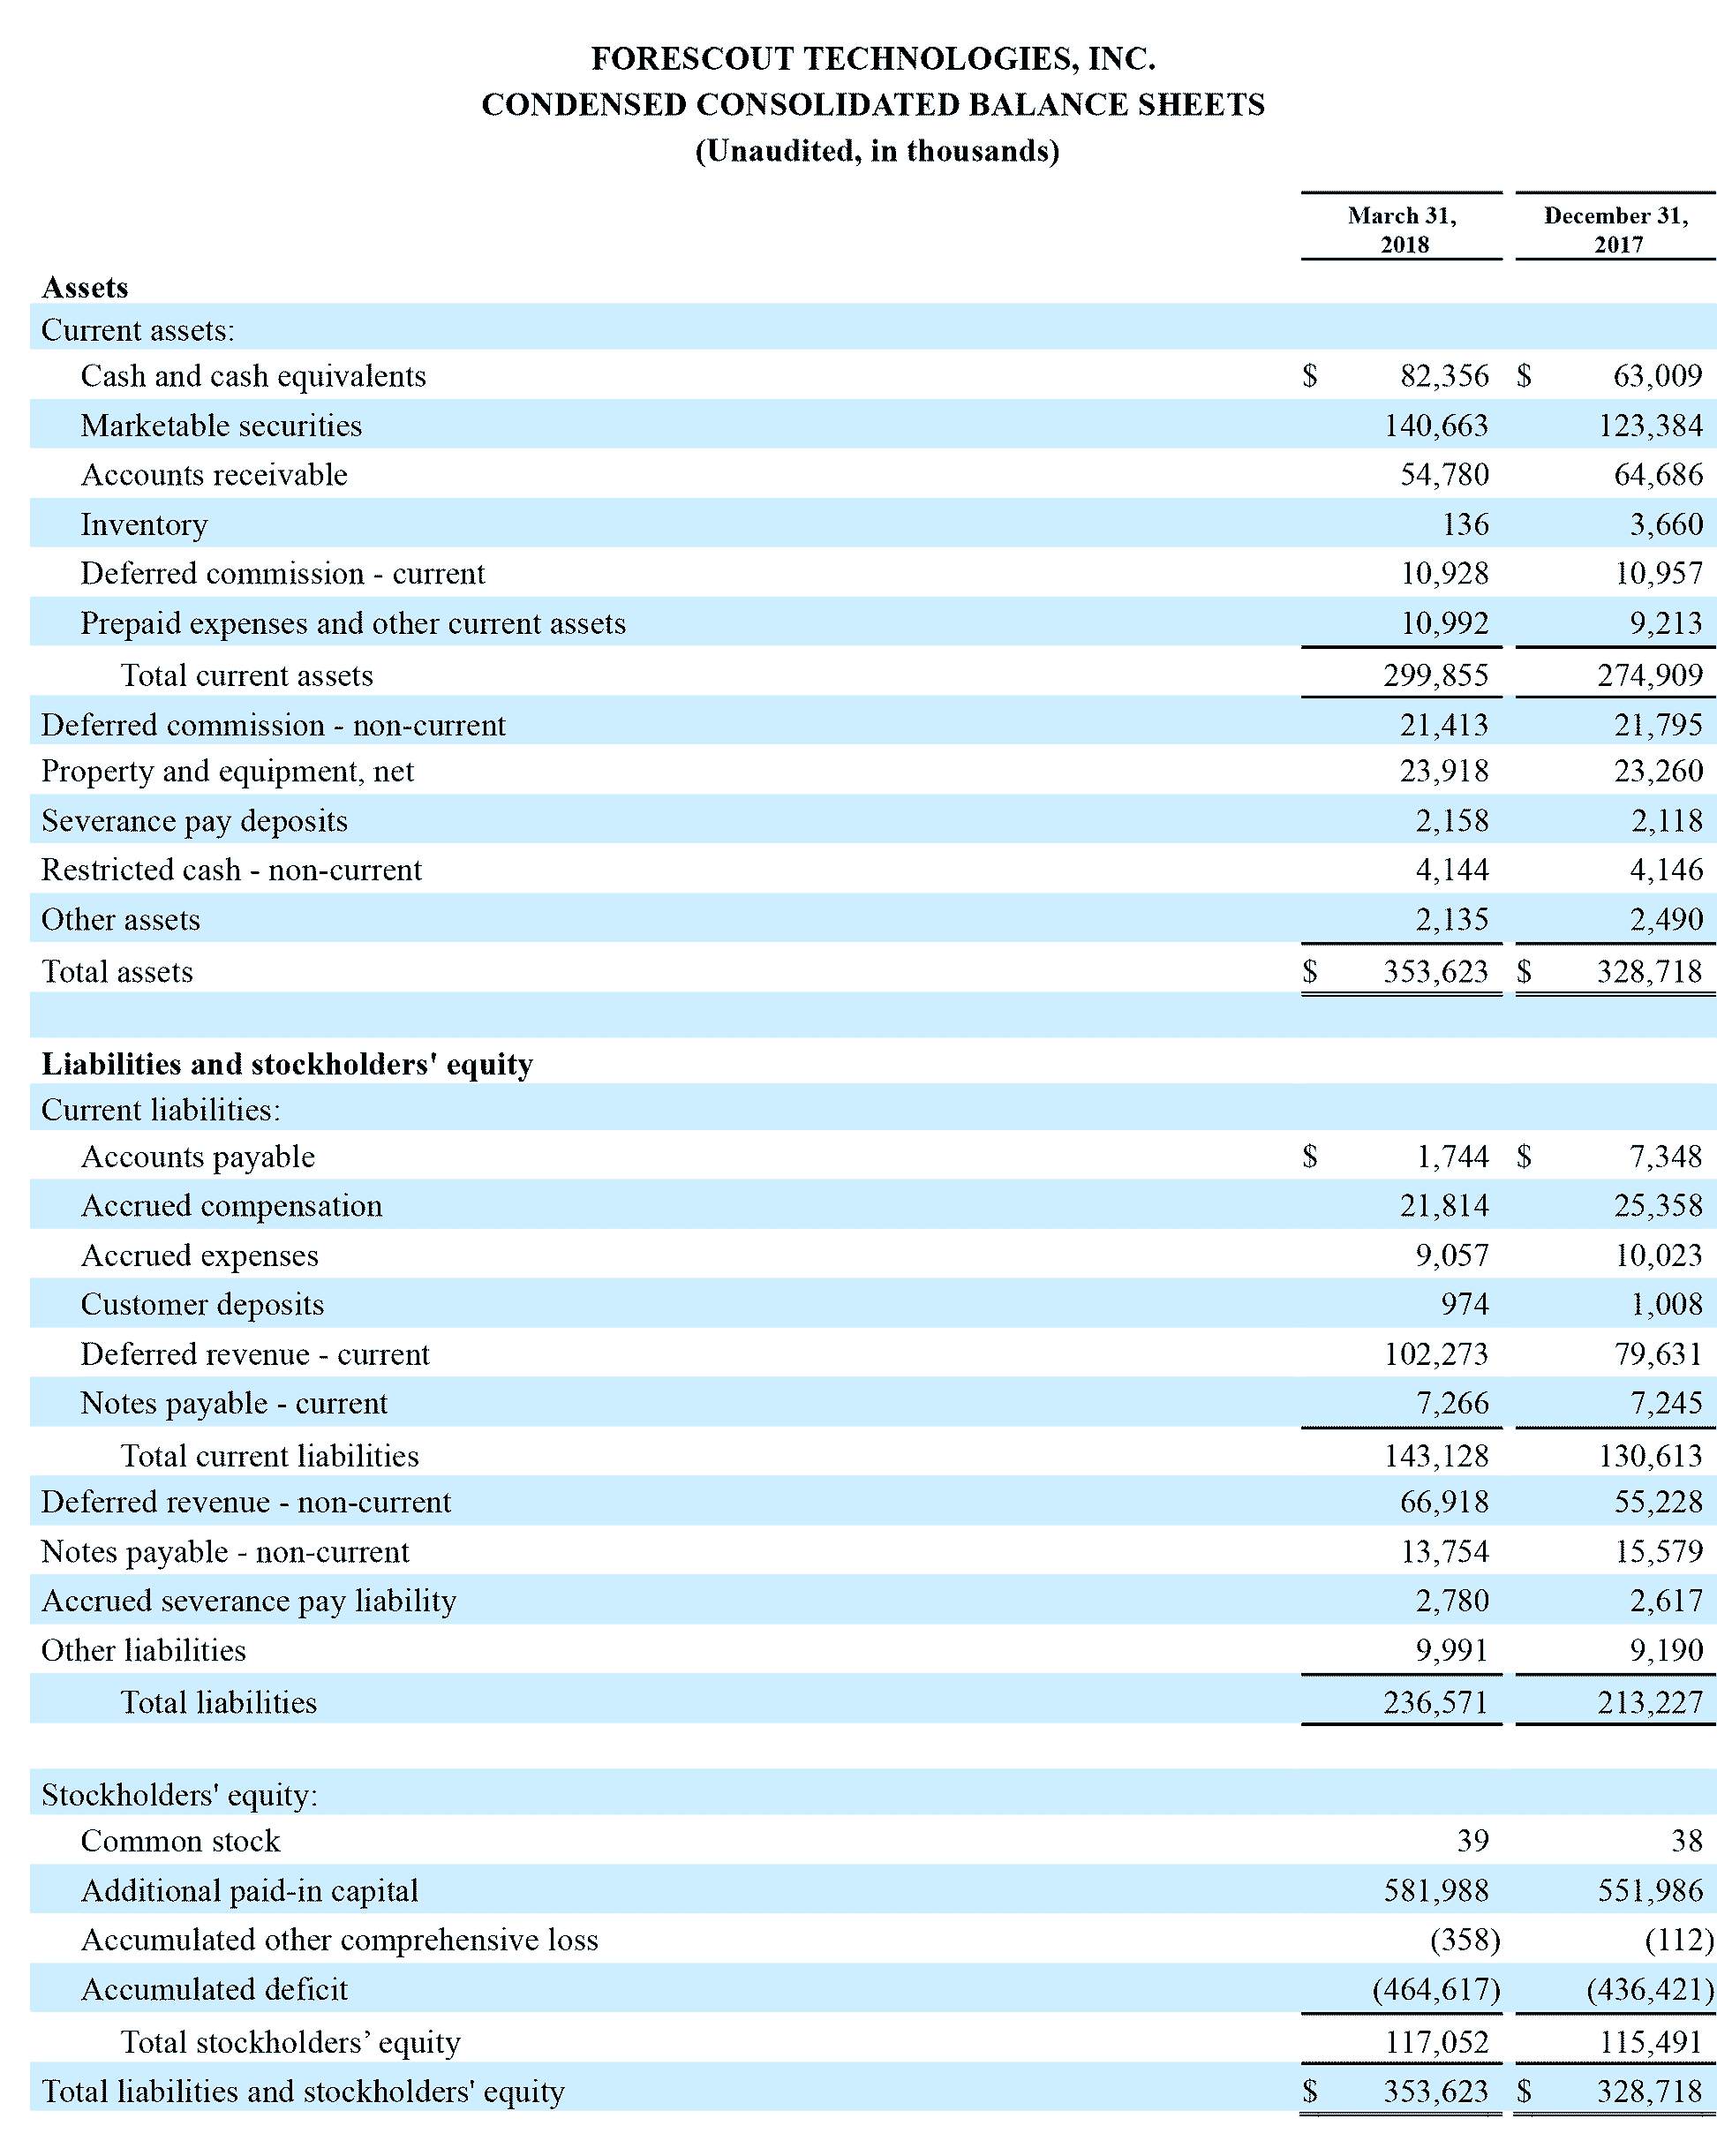 FS 2018 Q1 Condensed Consolidated Balance Sheets